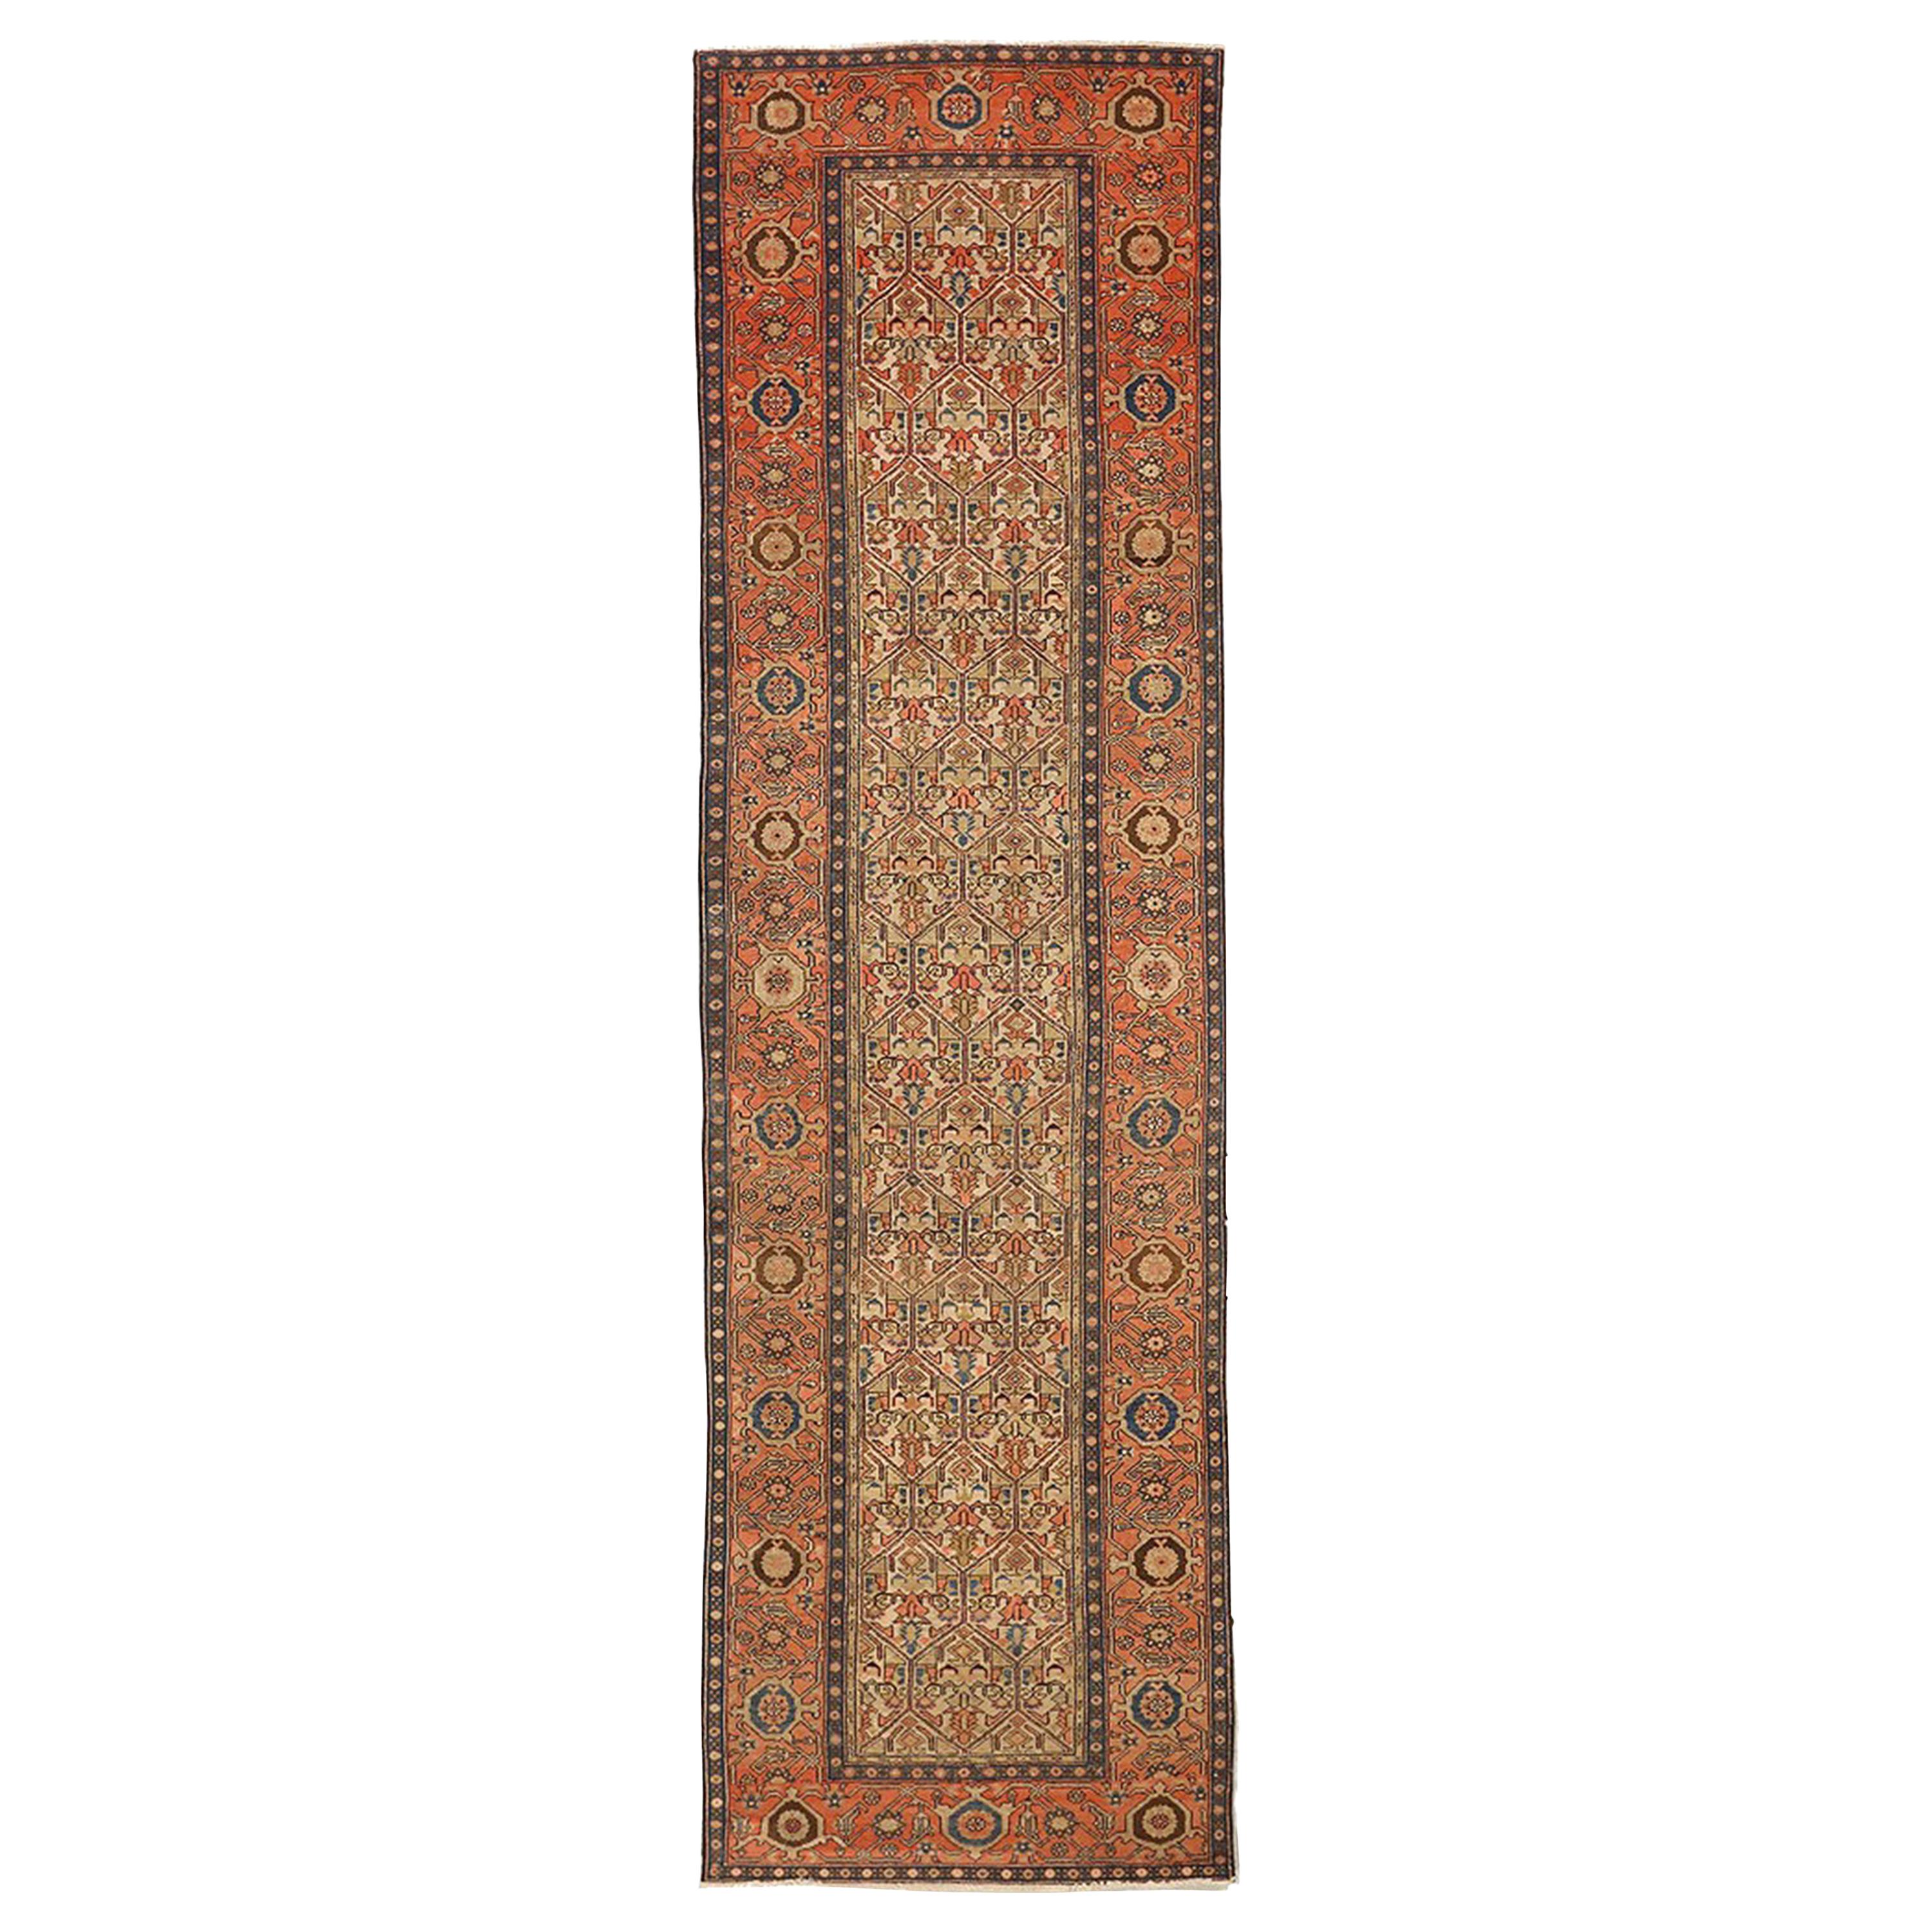 Antique Persian Malayer Runner Rug with Beige and Orange Floral Medallions